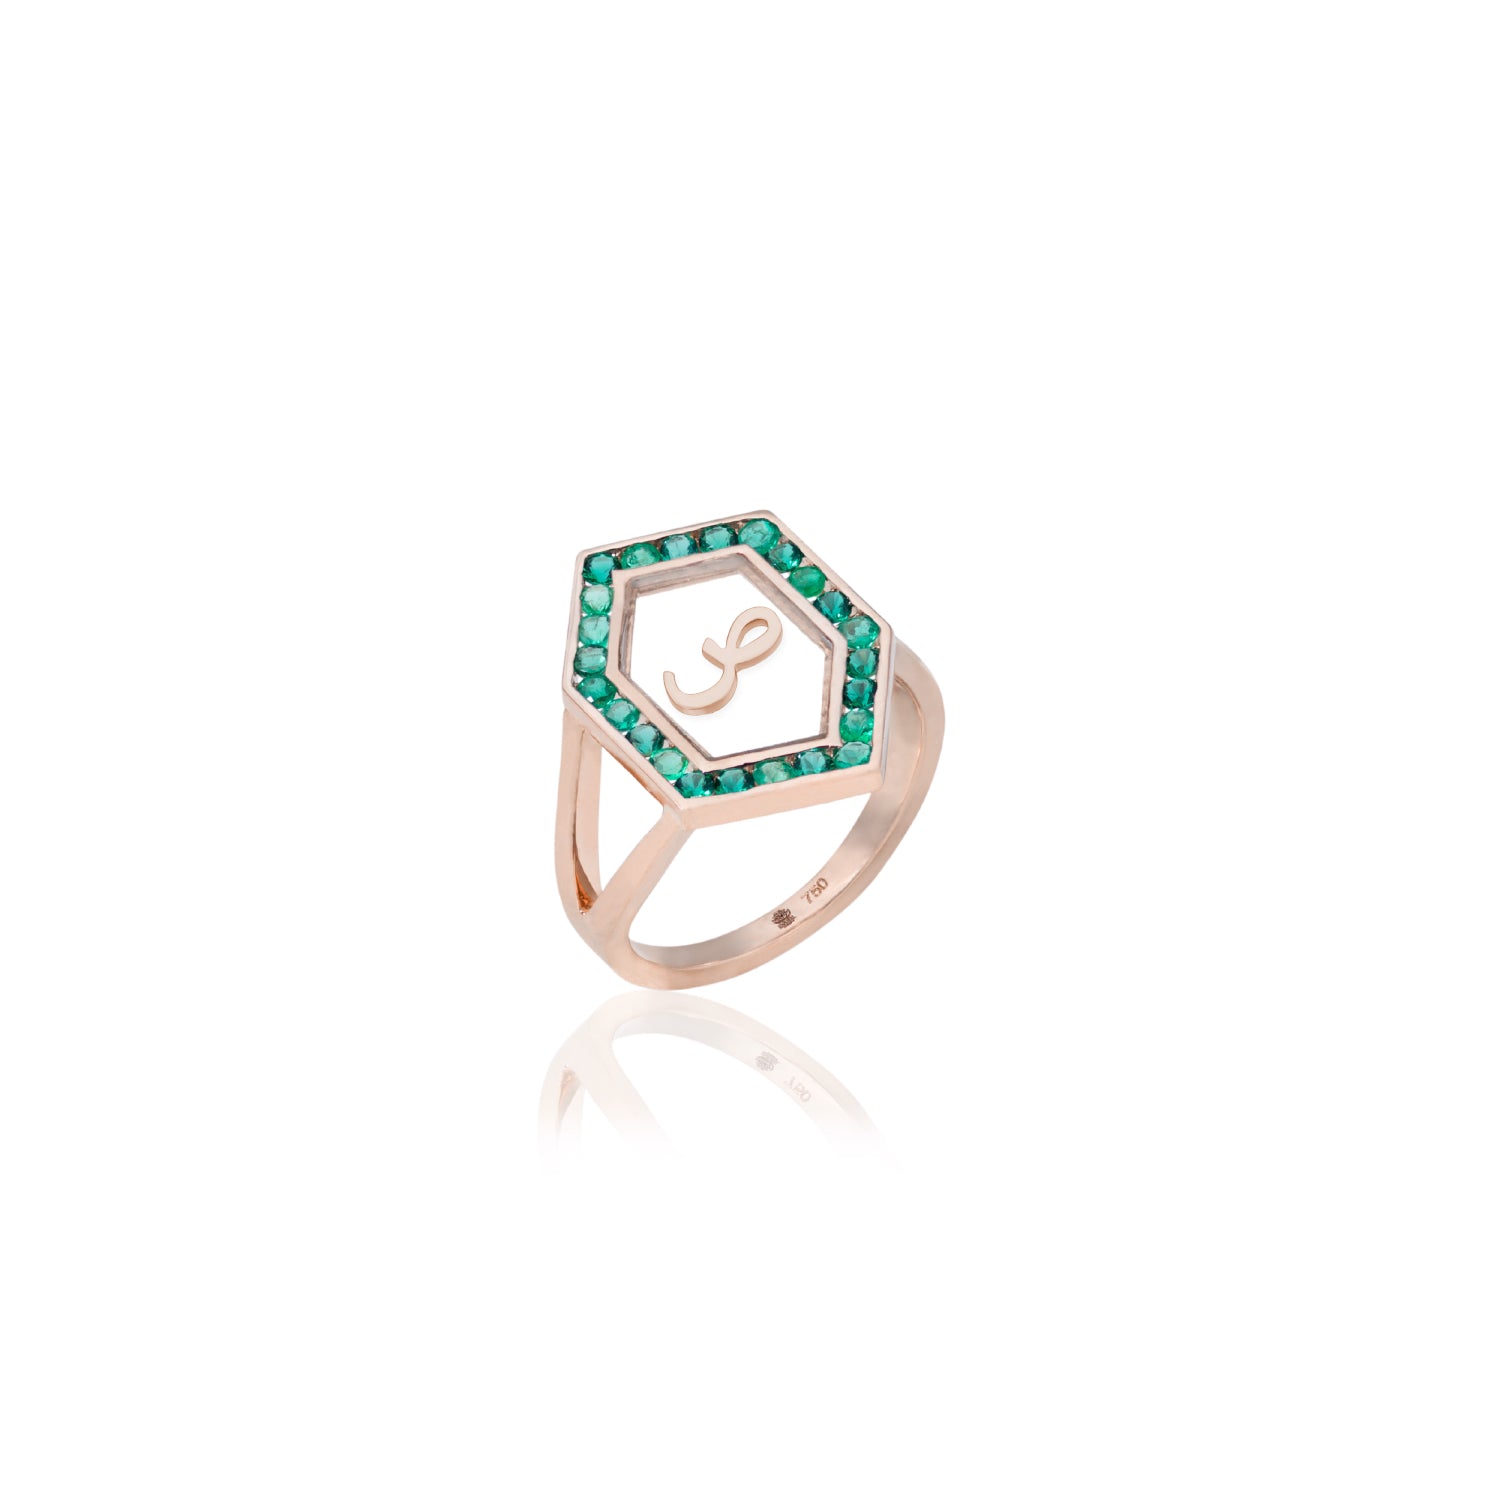 Qamoos 1.0 Letter ص Emerald Ring in Rose Gold